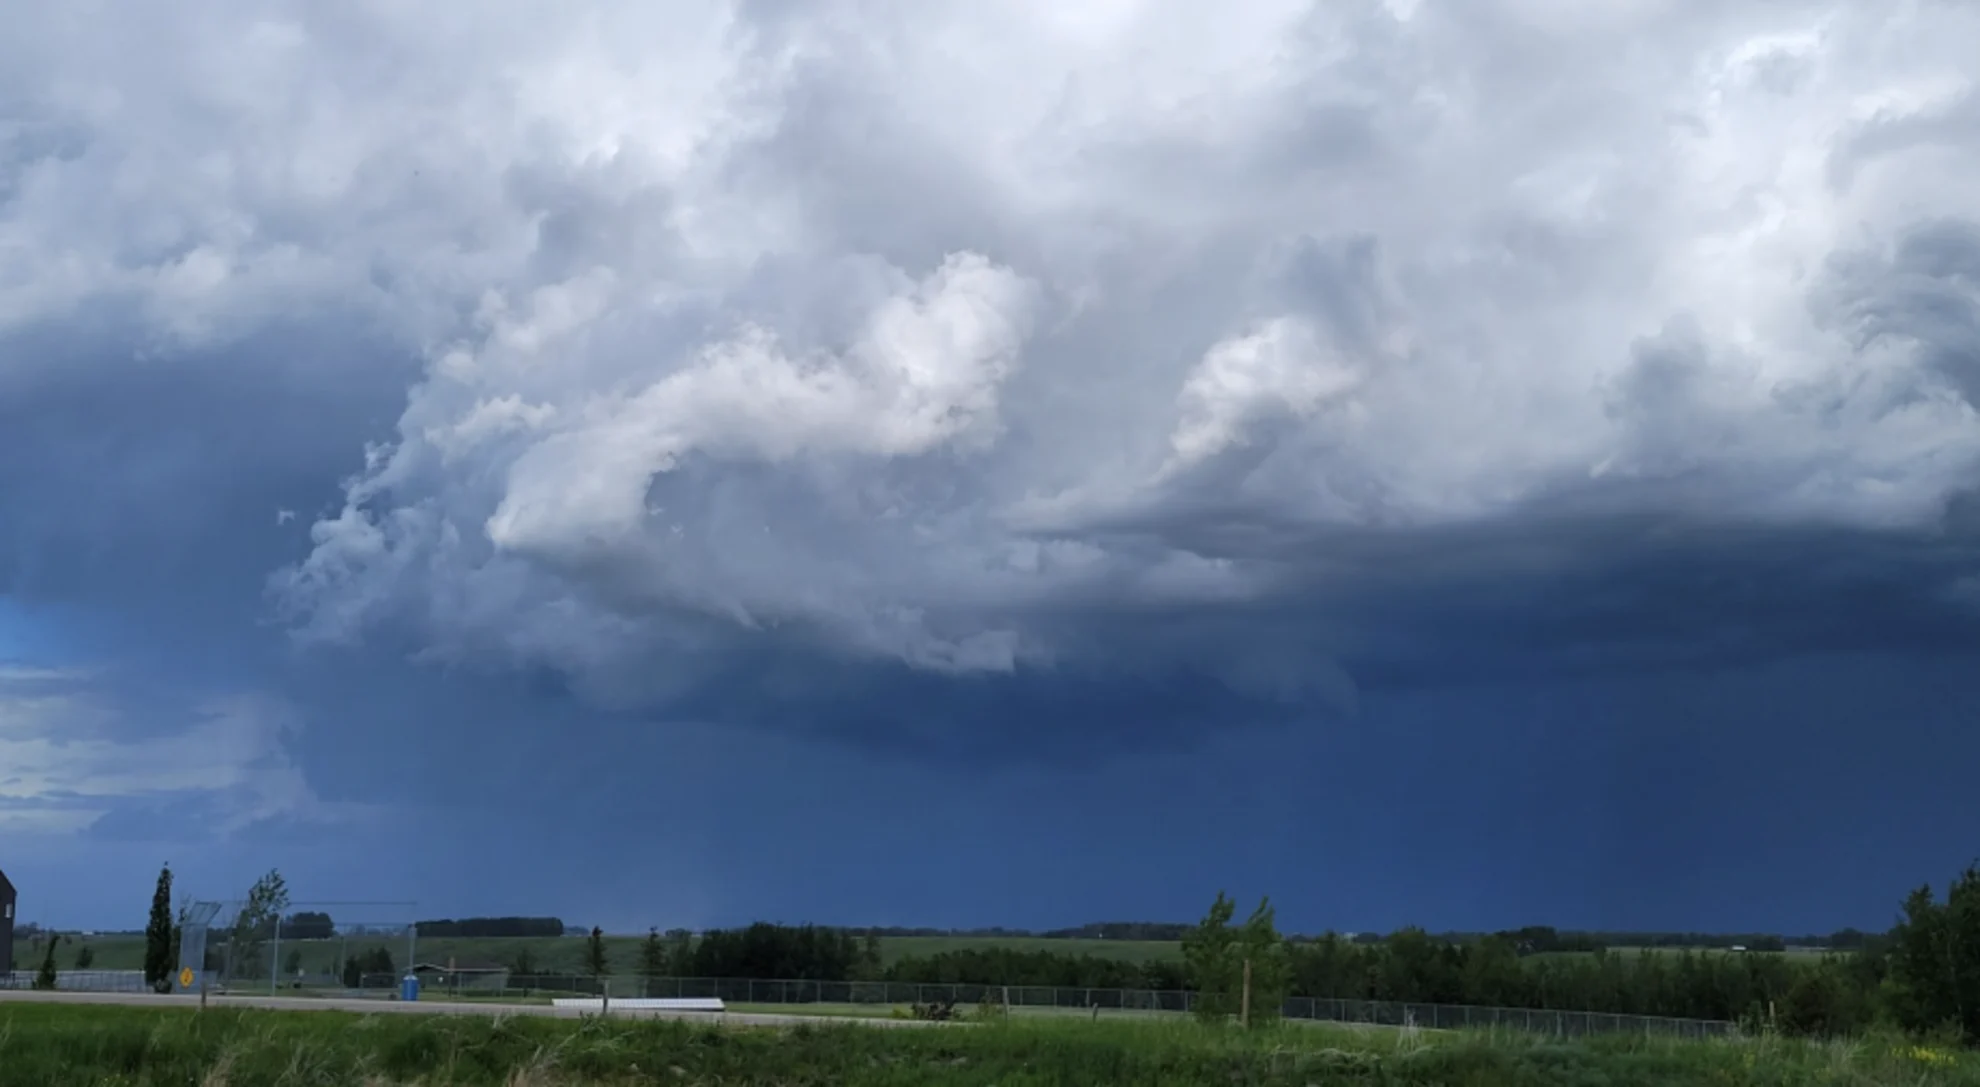 Plan ahead: Thunderstorms and funnel clouds will be possible across parts of Alberta on Wednesday. Locales at risk, here